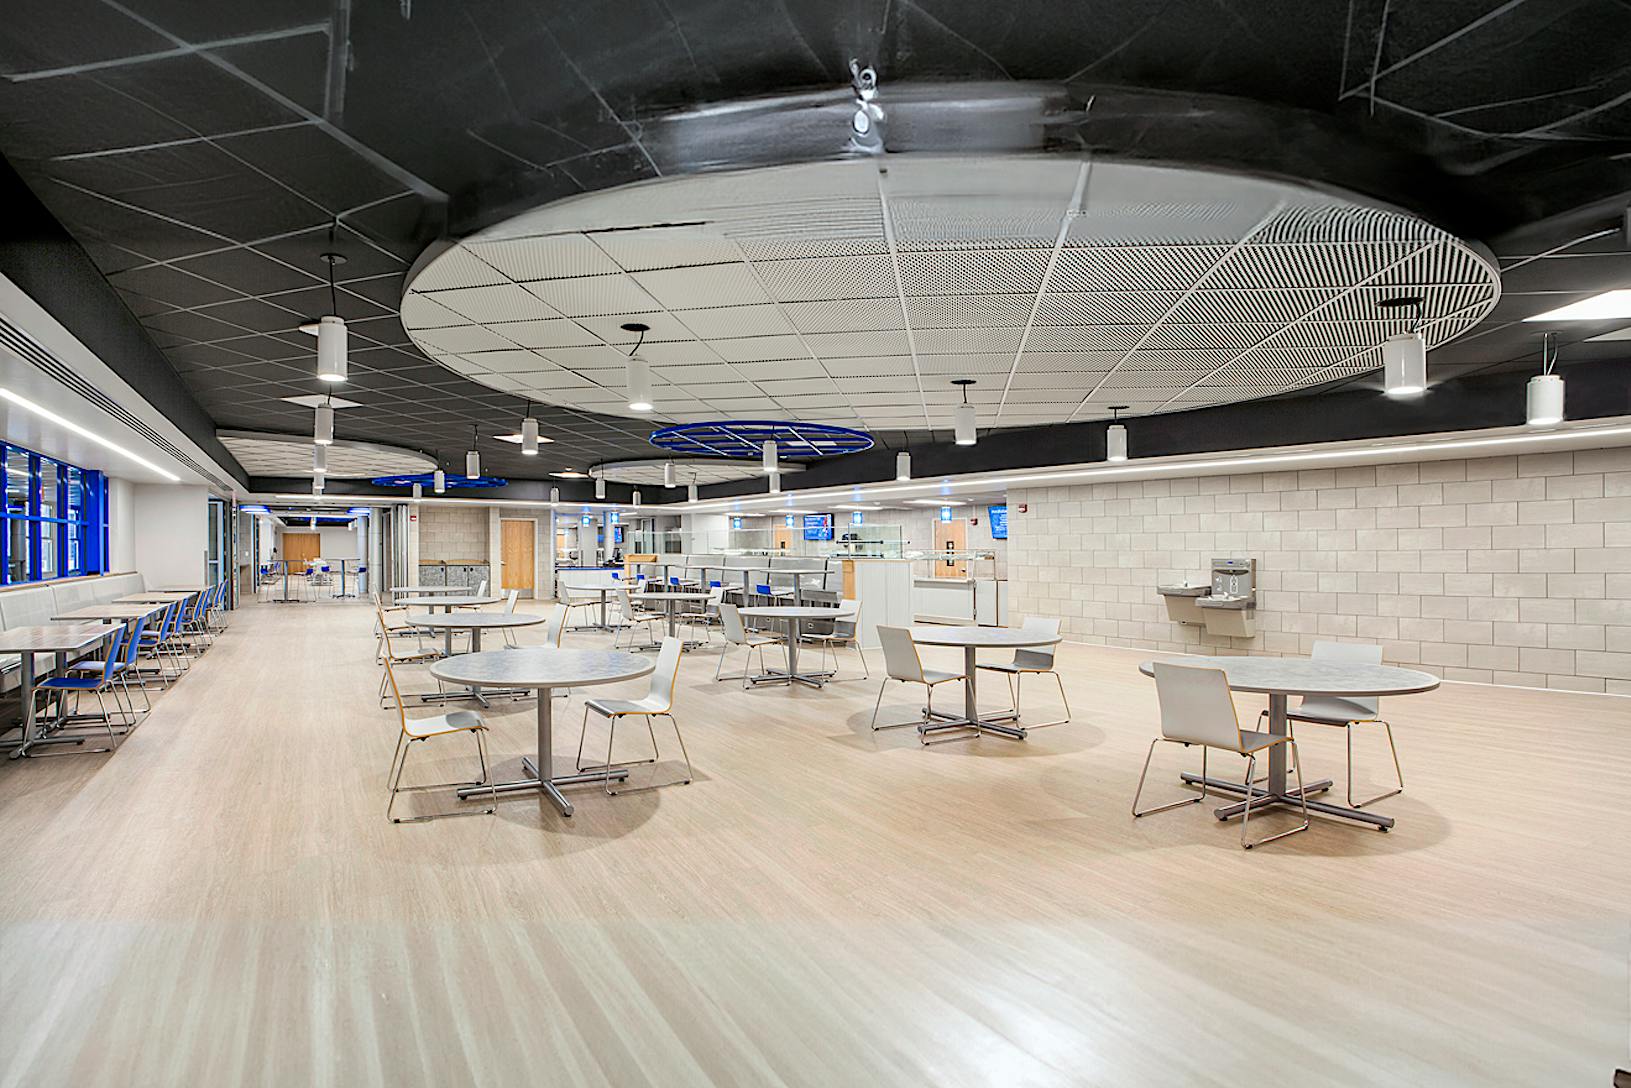 A spacious, modern cafeteria features folding walls that offer flexibility for various events and gatherings.